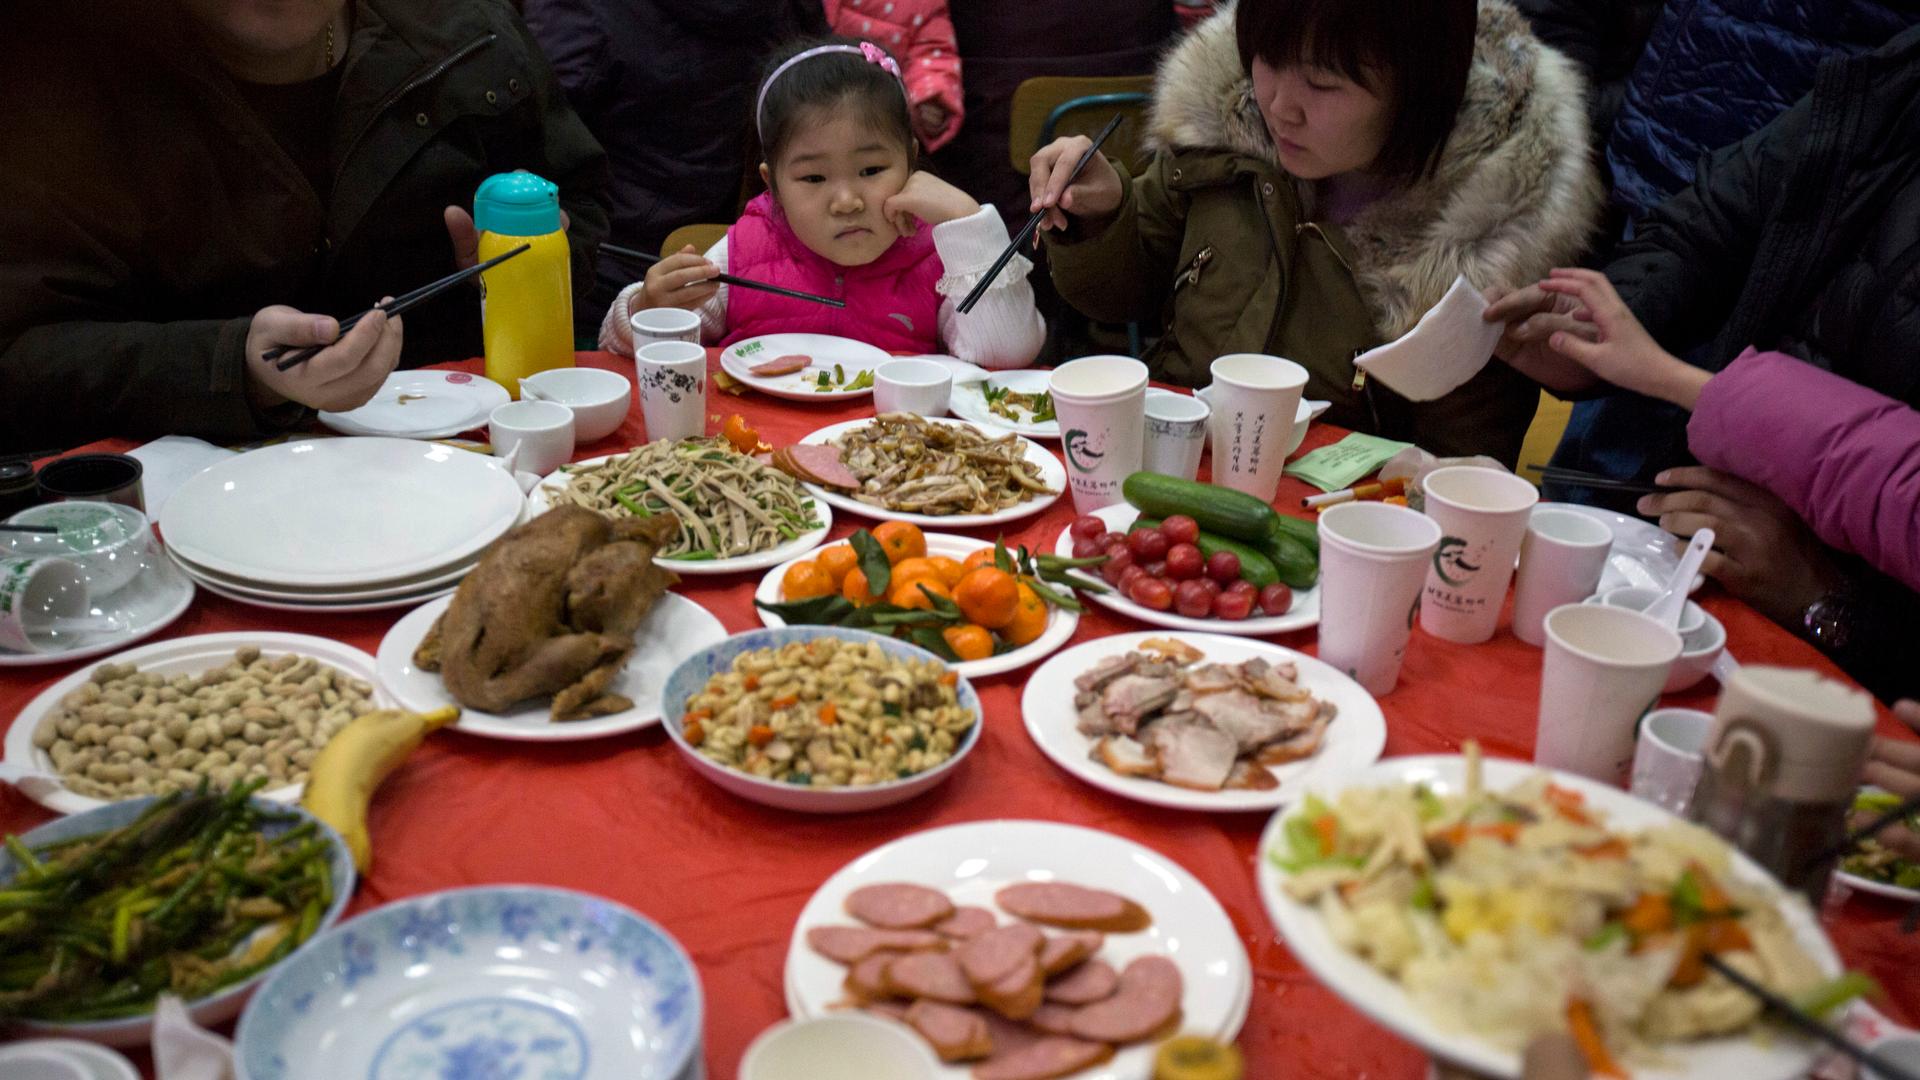 A Chinese girl looks upon a table full of food during a "1,000 people dumpling feast" in Liuminying village on the outskirt of Beijing, China, Jan. 27, 2017.